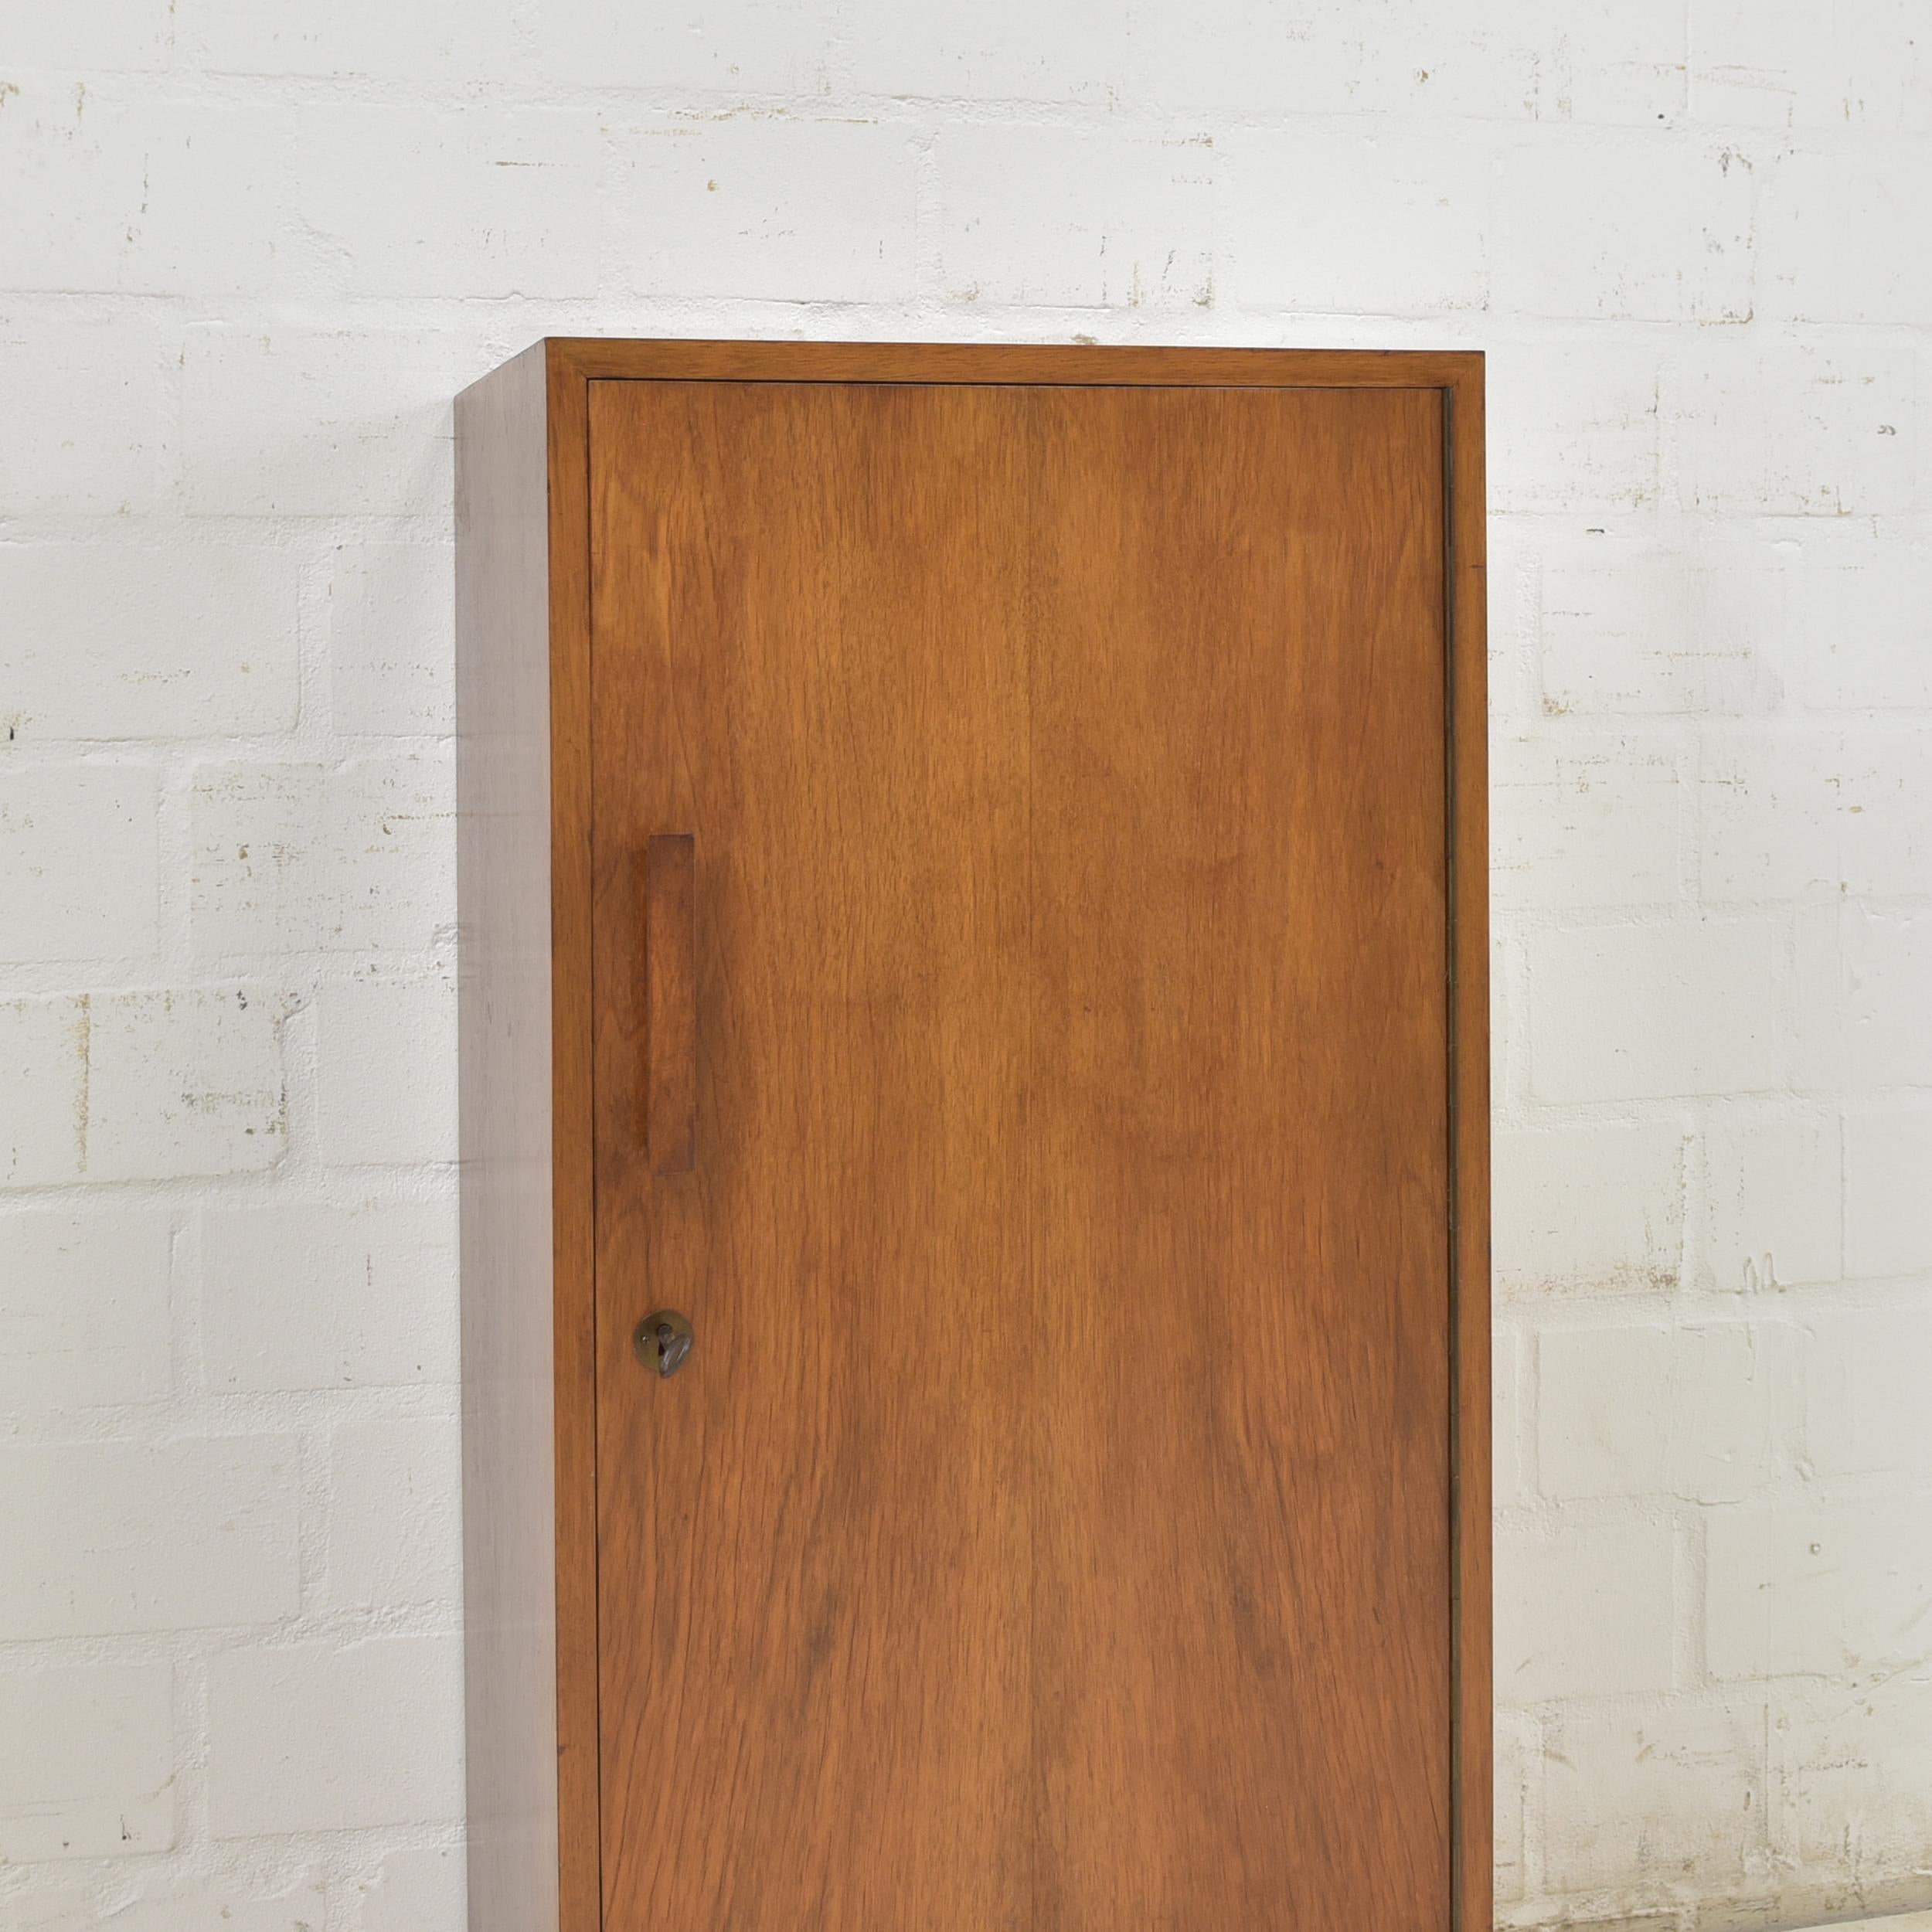 Retro Midcentury Art Deco Narrow Chest of Drawers / Small Cabinet, 1950 For Sale 3